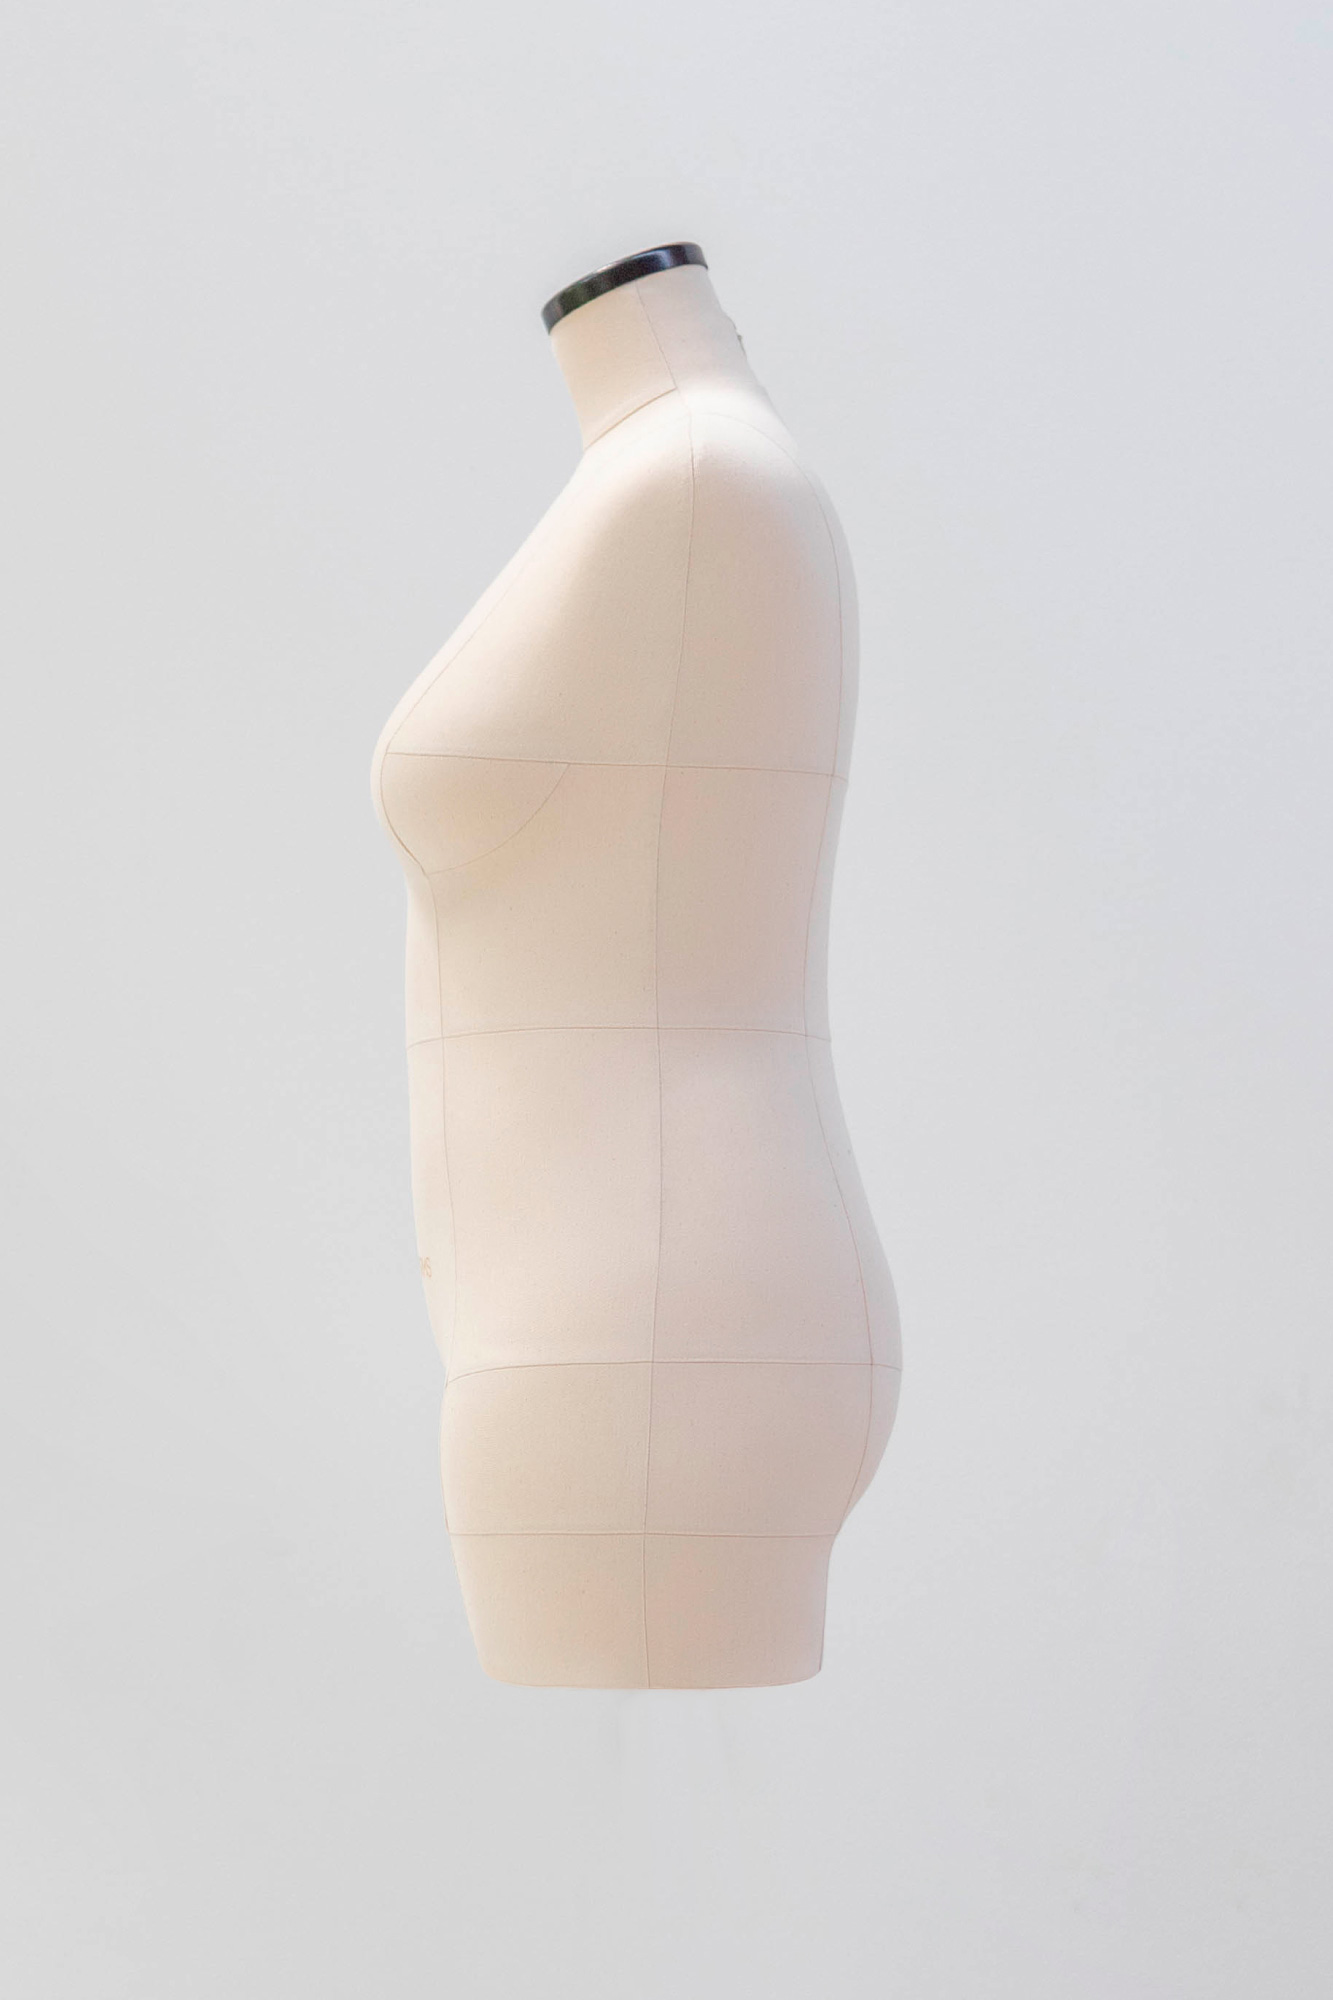 SOFIA // Soft Anatomic Tailor Dress Form With collapsible